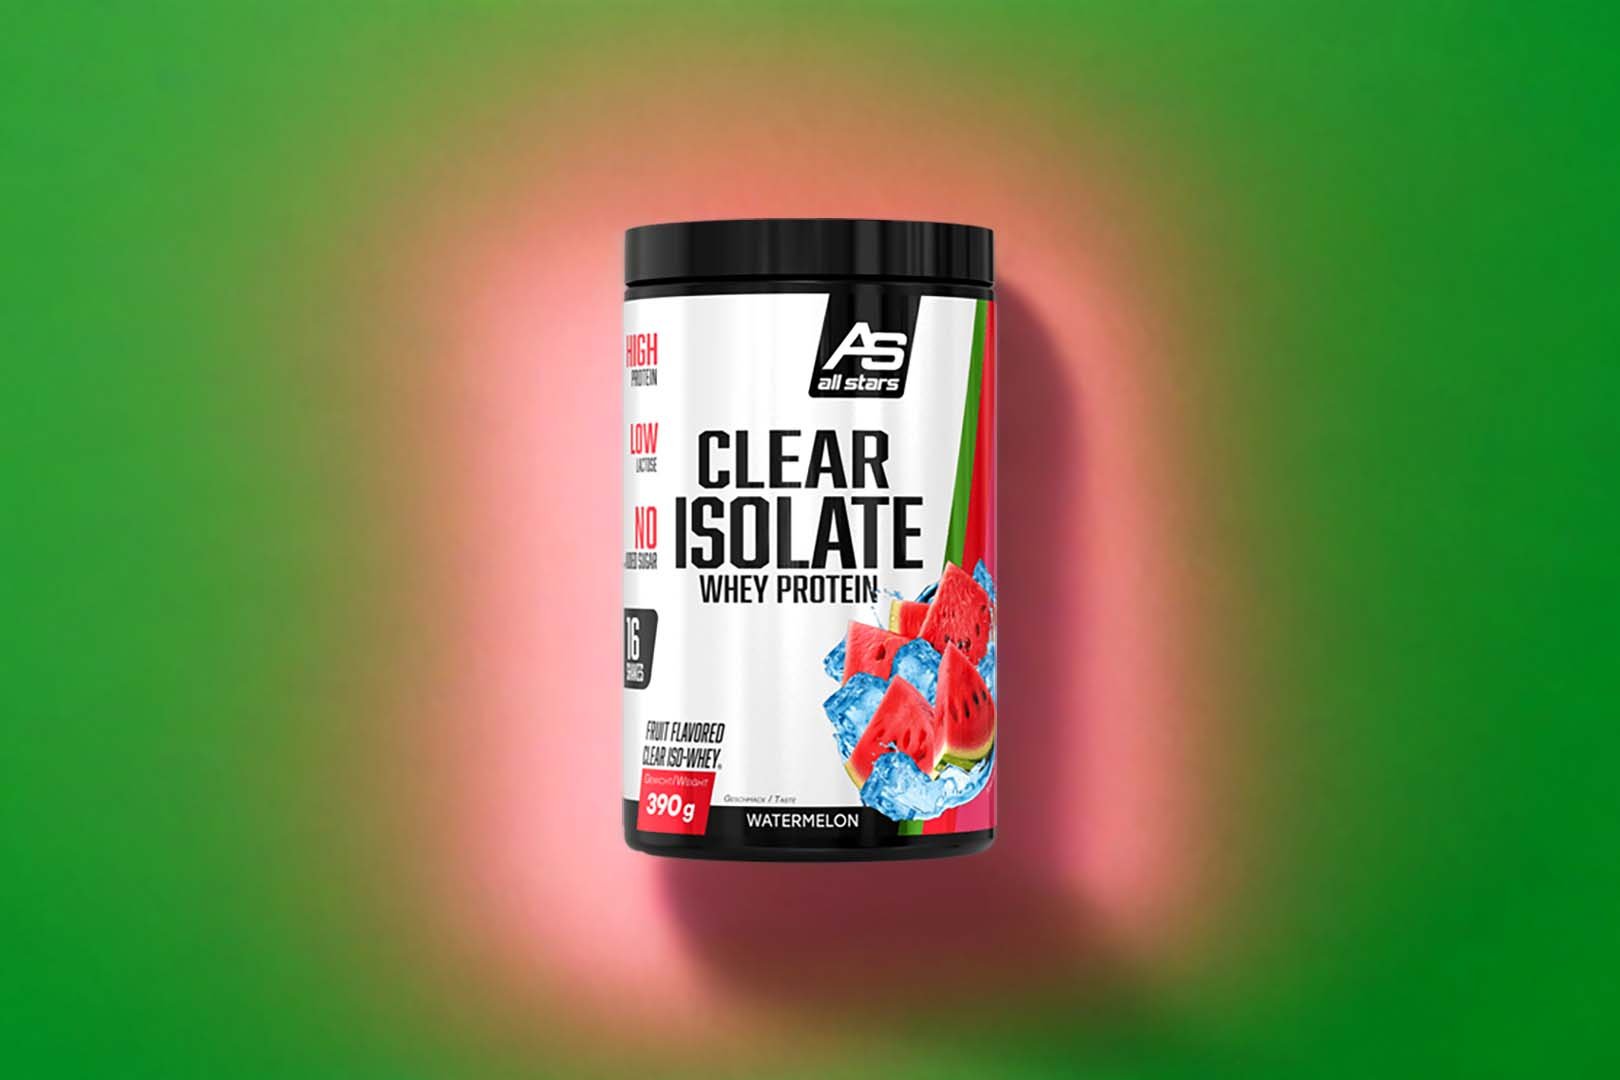 All Stars Watermelon Clear Isolate